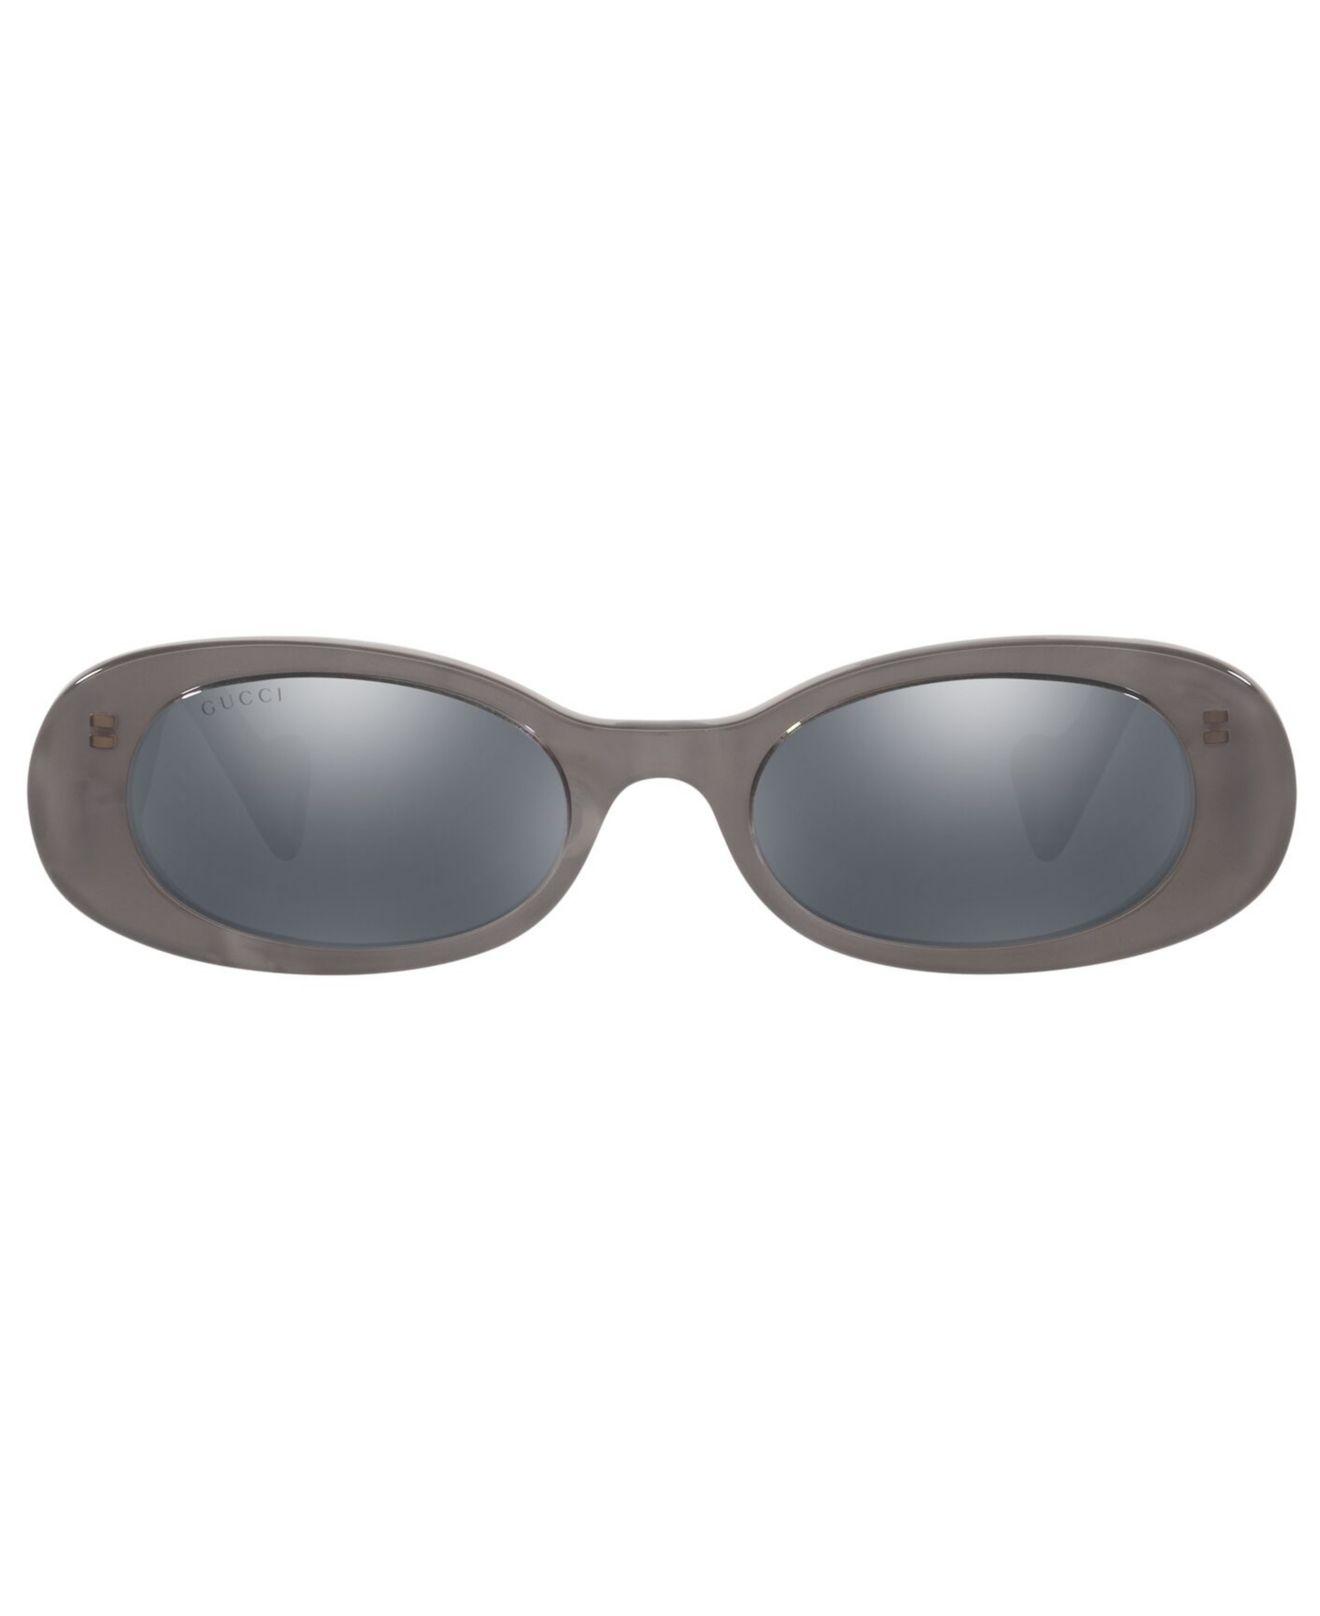 Gucci GG0517S 002 Women's Sunglasses Grey Size 52 - Free Rx Lenses in Gray  | Lyst